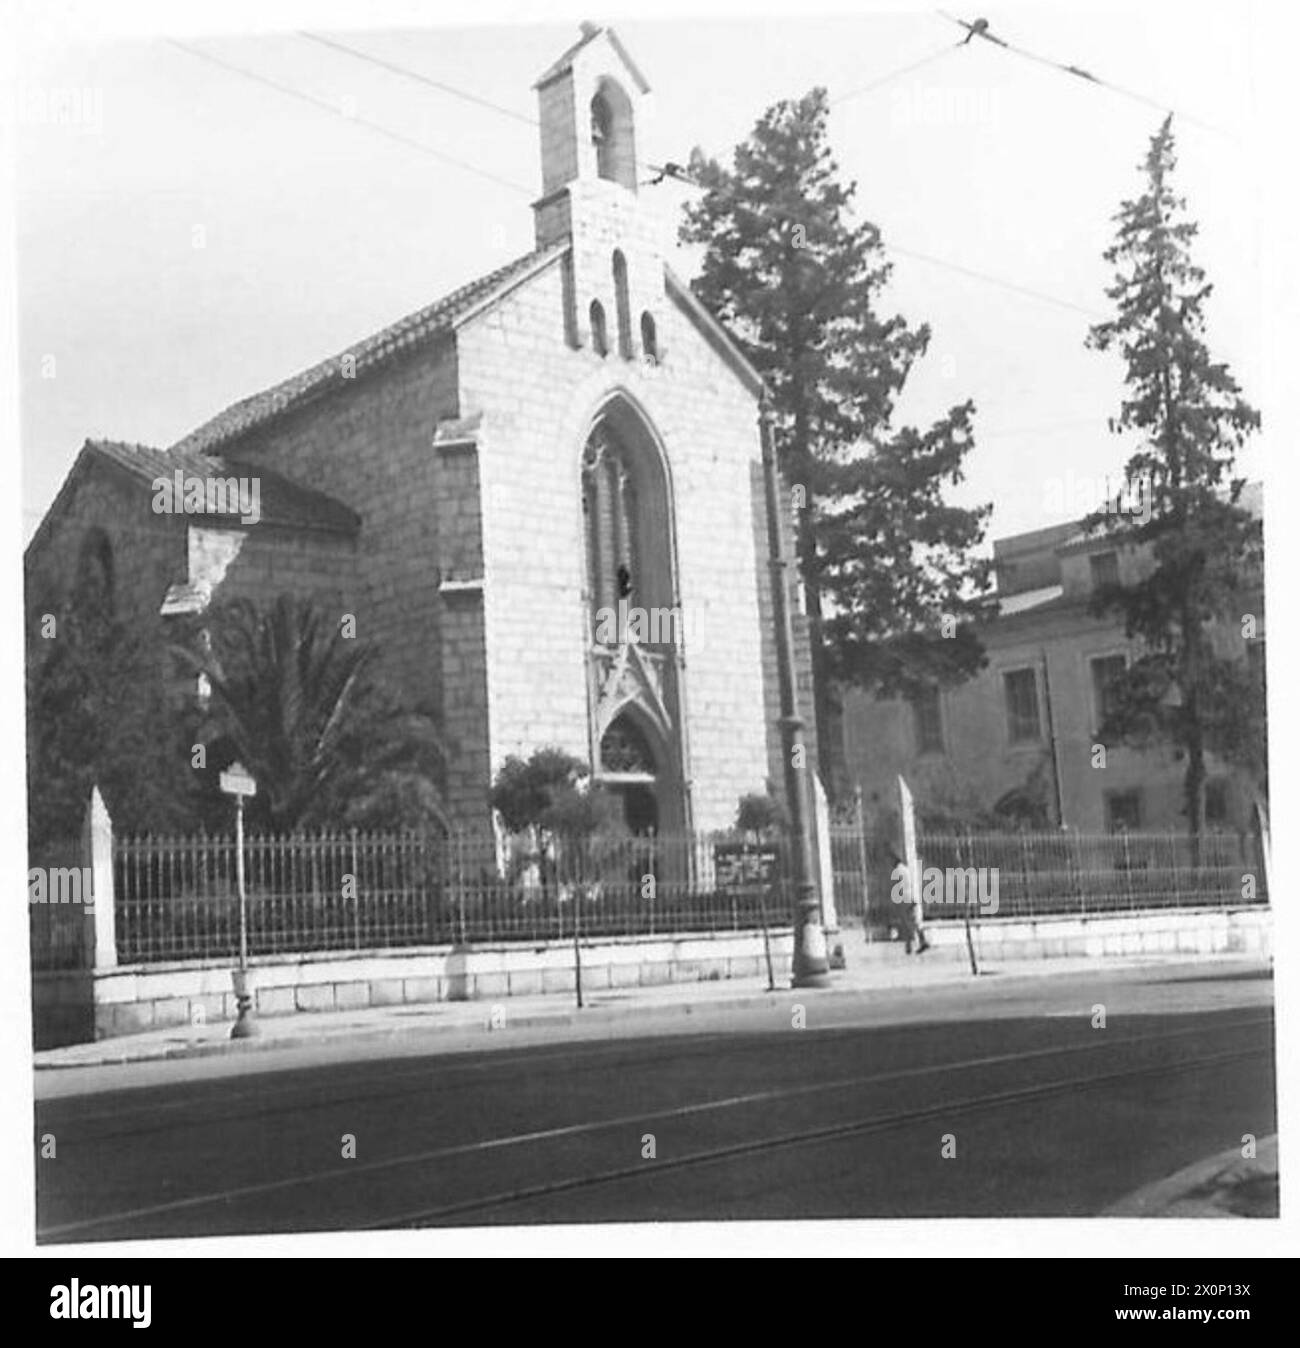 GREECE : VARIOUS - Interior and exterior shots of St. Paul's (British) Church in Athens. Photographic negative , British Army Stock Photo